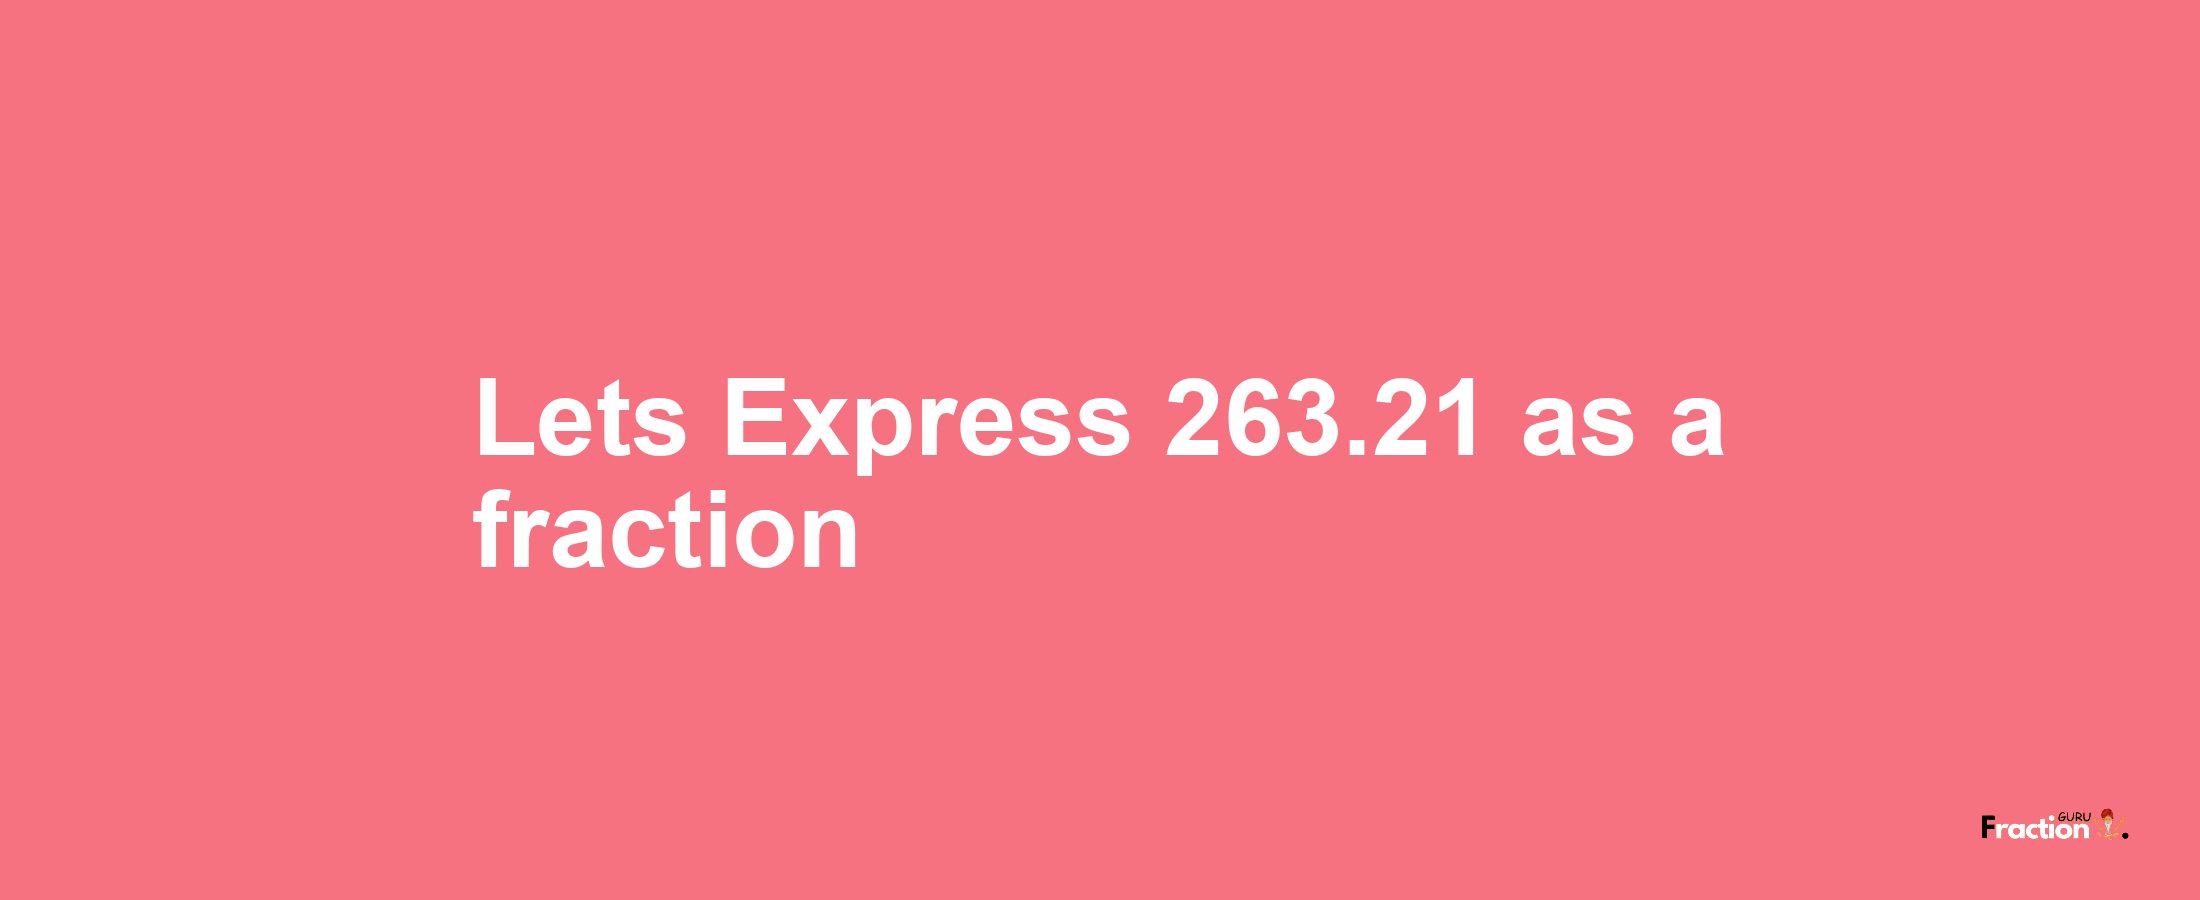 Lets Express 263.21 as afraction